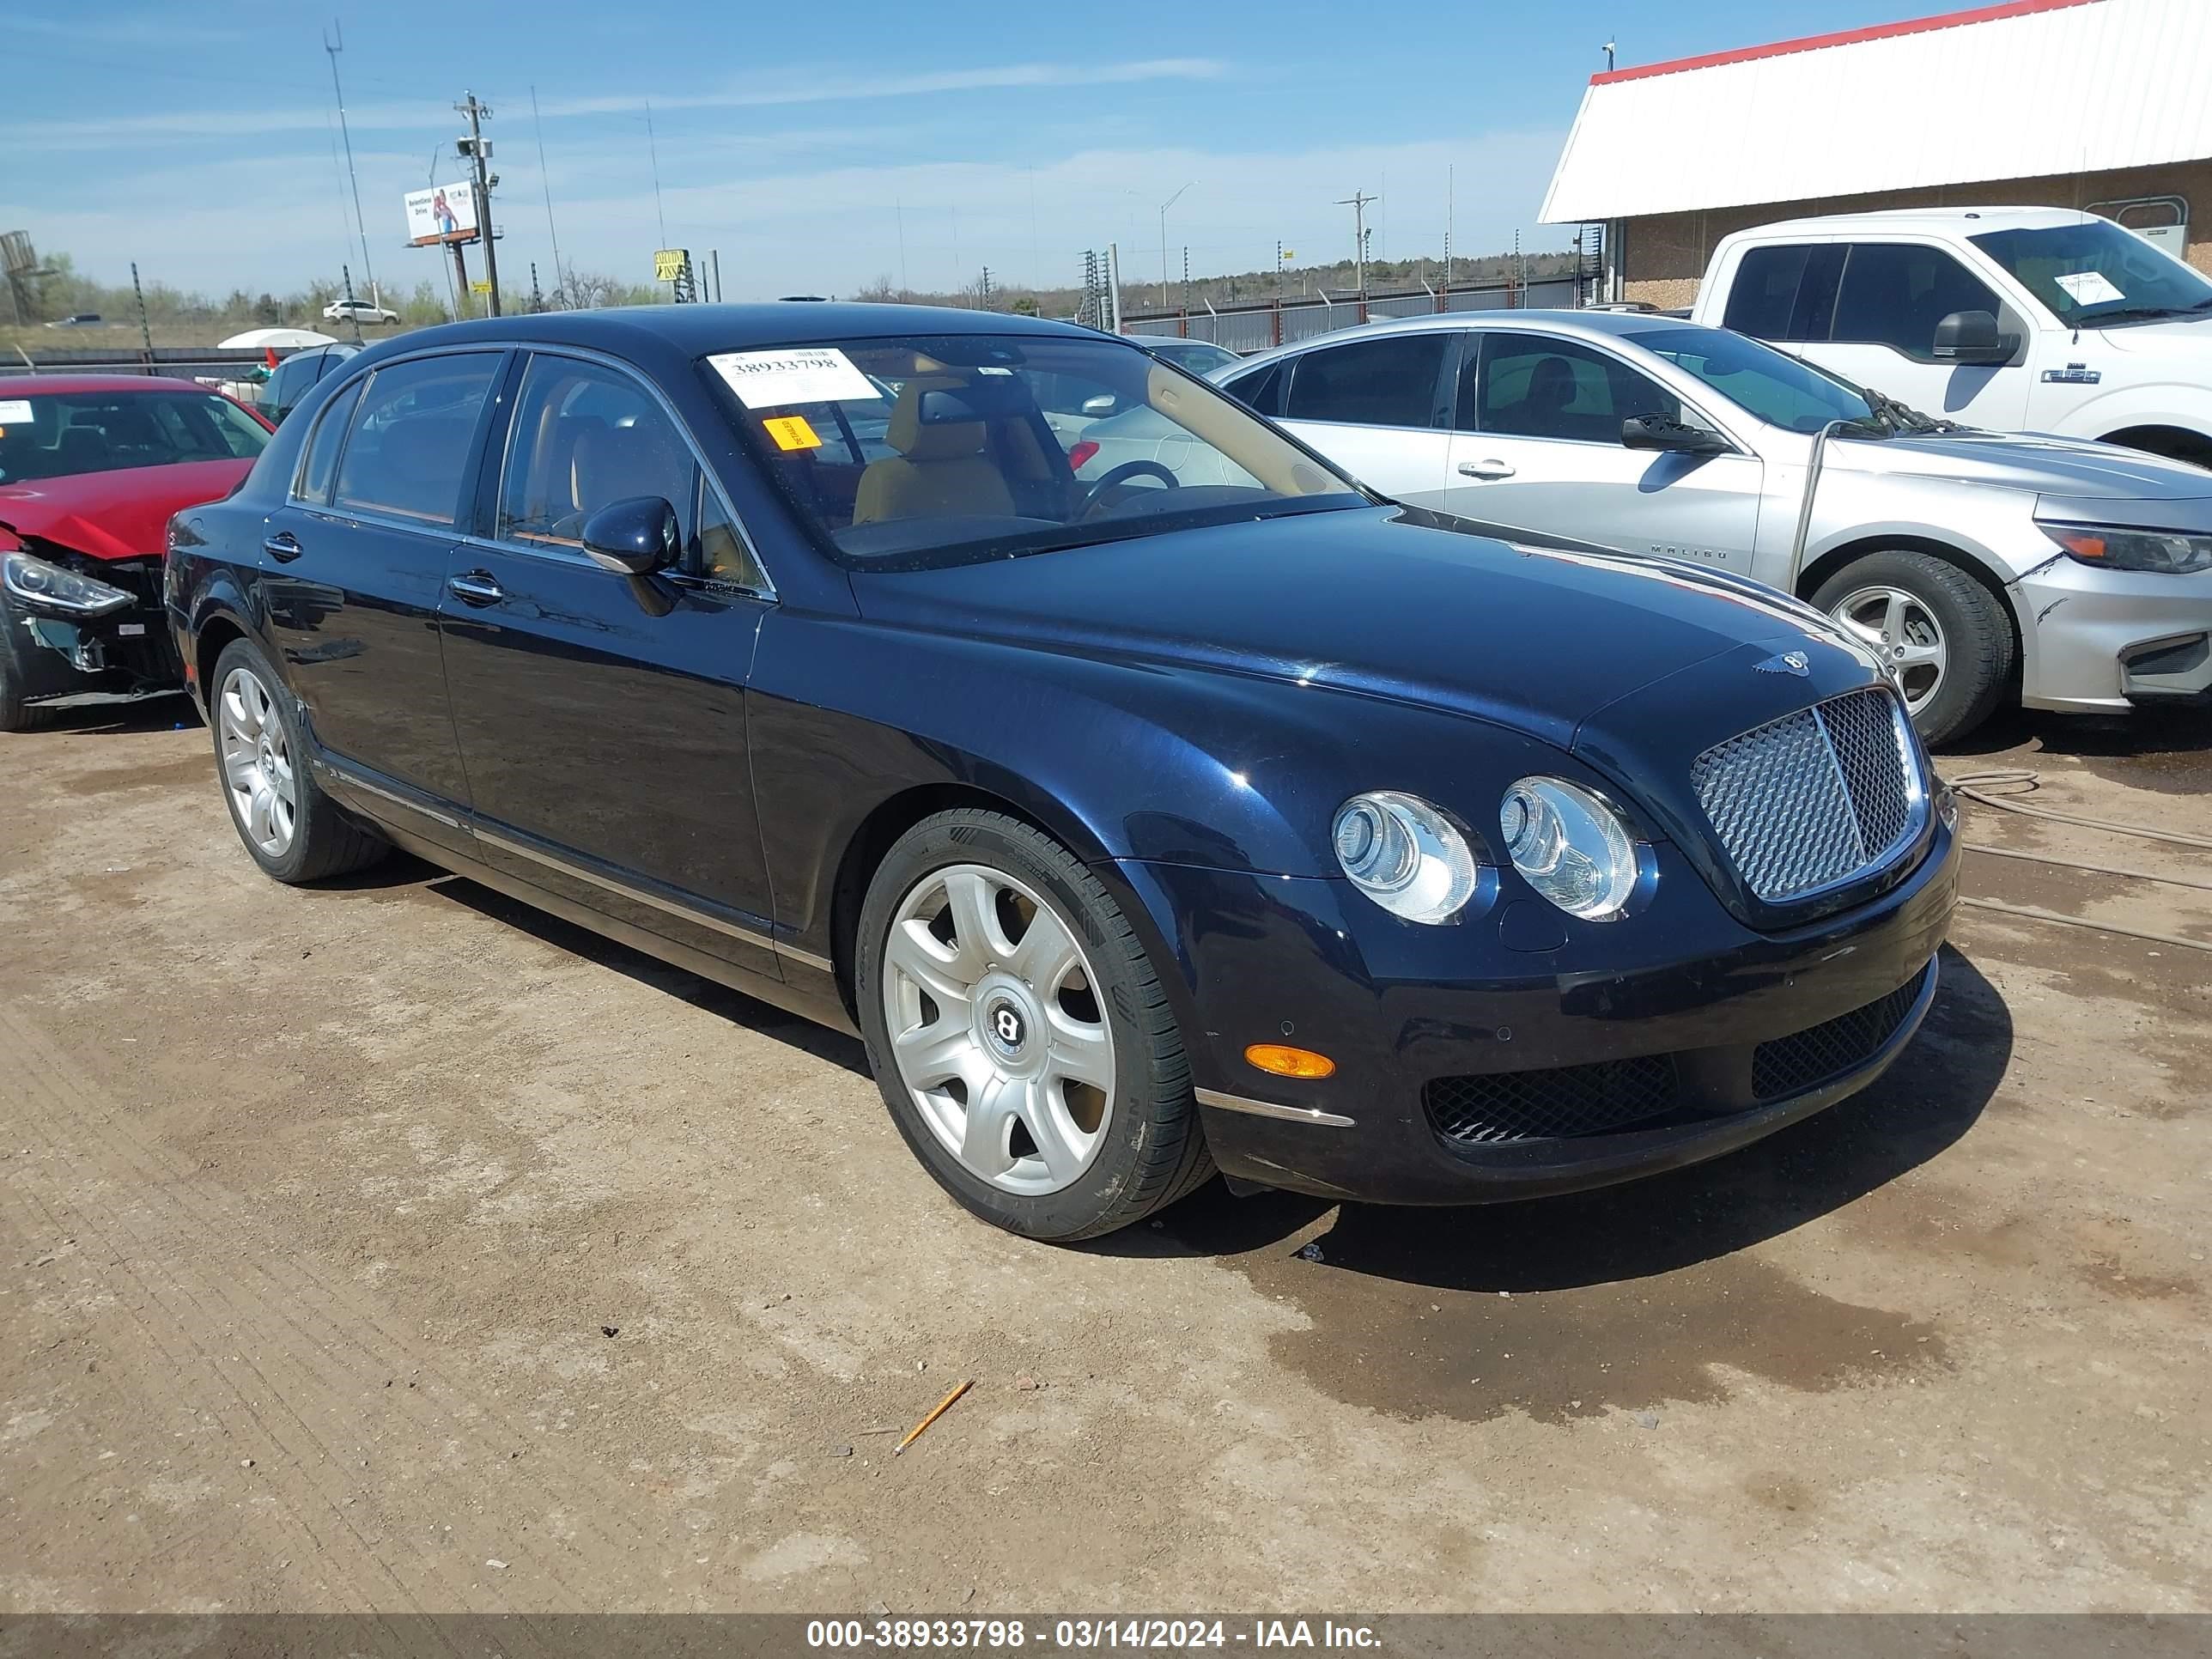 VIN: SCBBR53W46C034805 - bentley continental flying spur